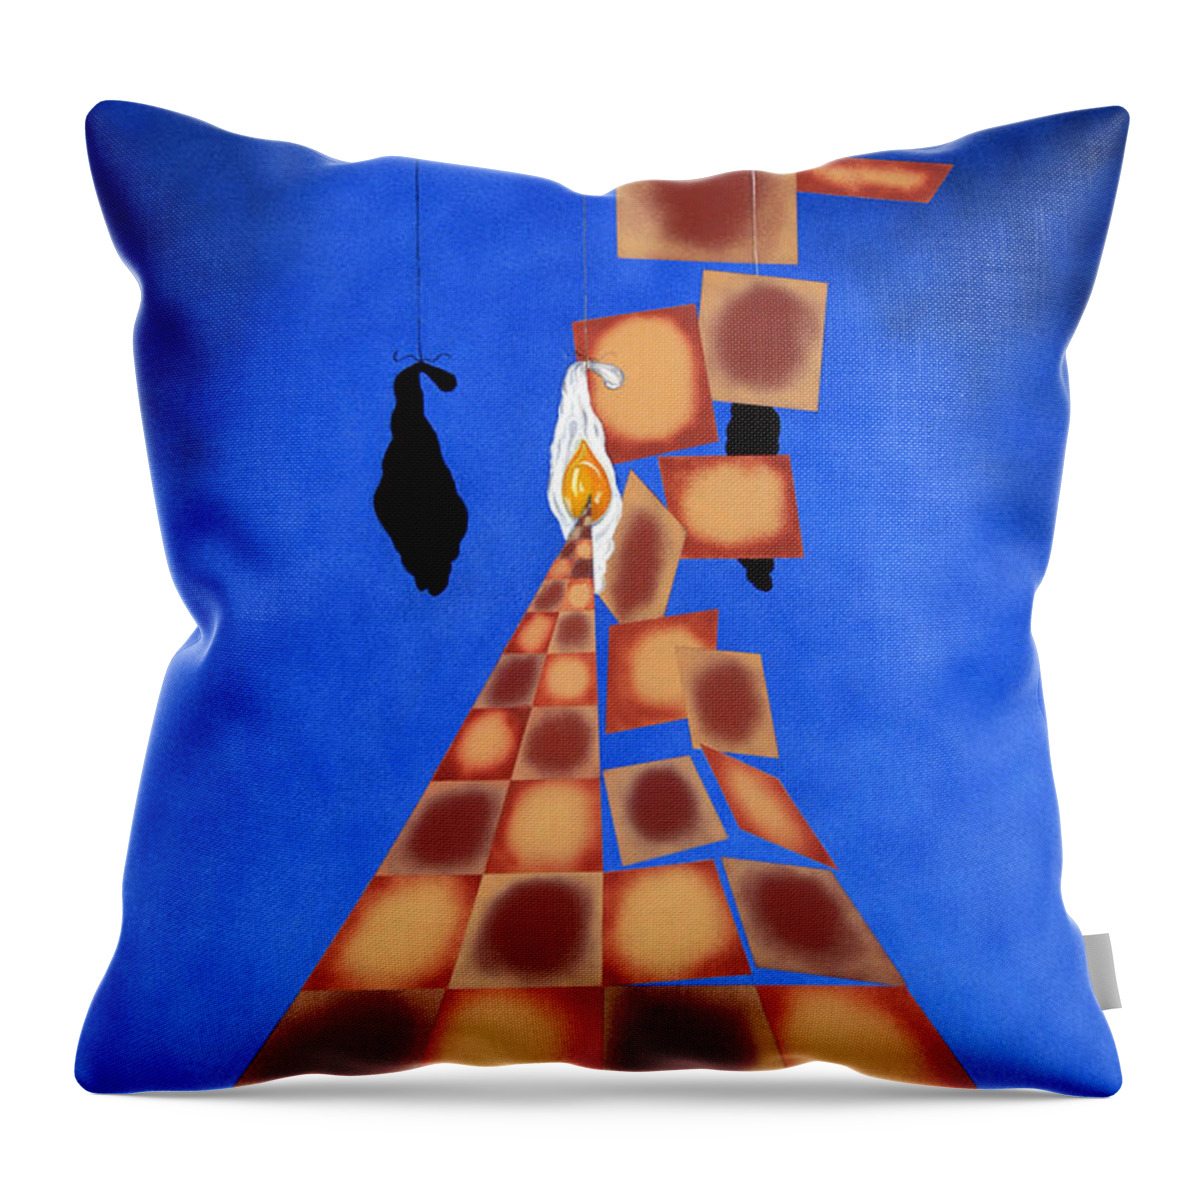 Salvador Dali Throw Pillow featuring the painting Disrupted Egg Path On Blue by James Lavott